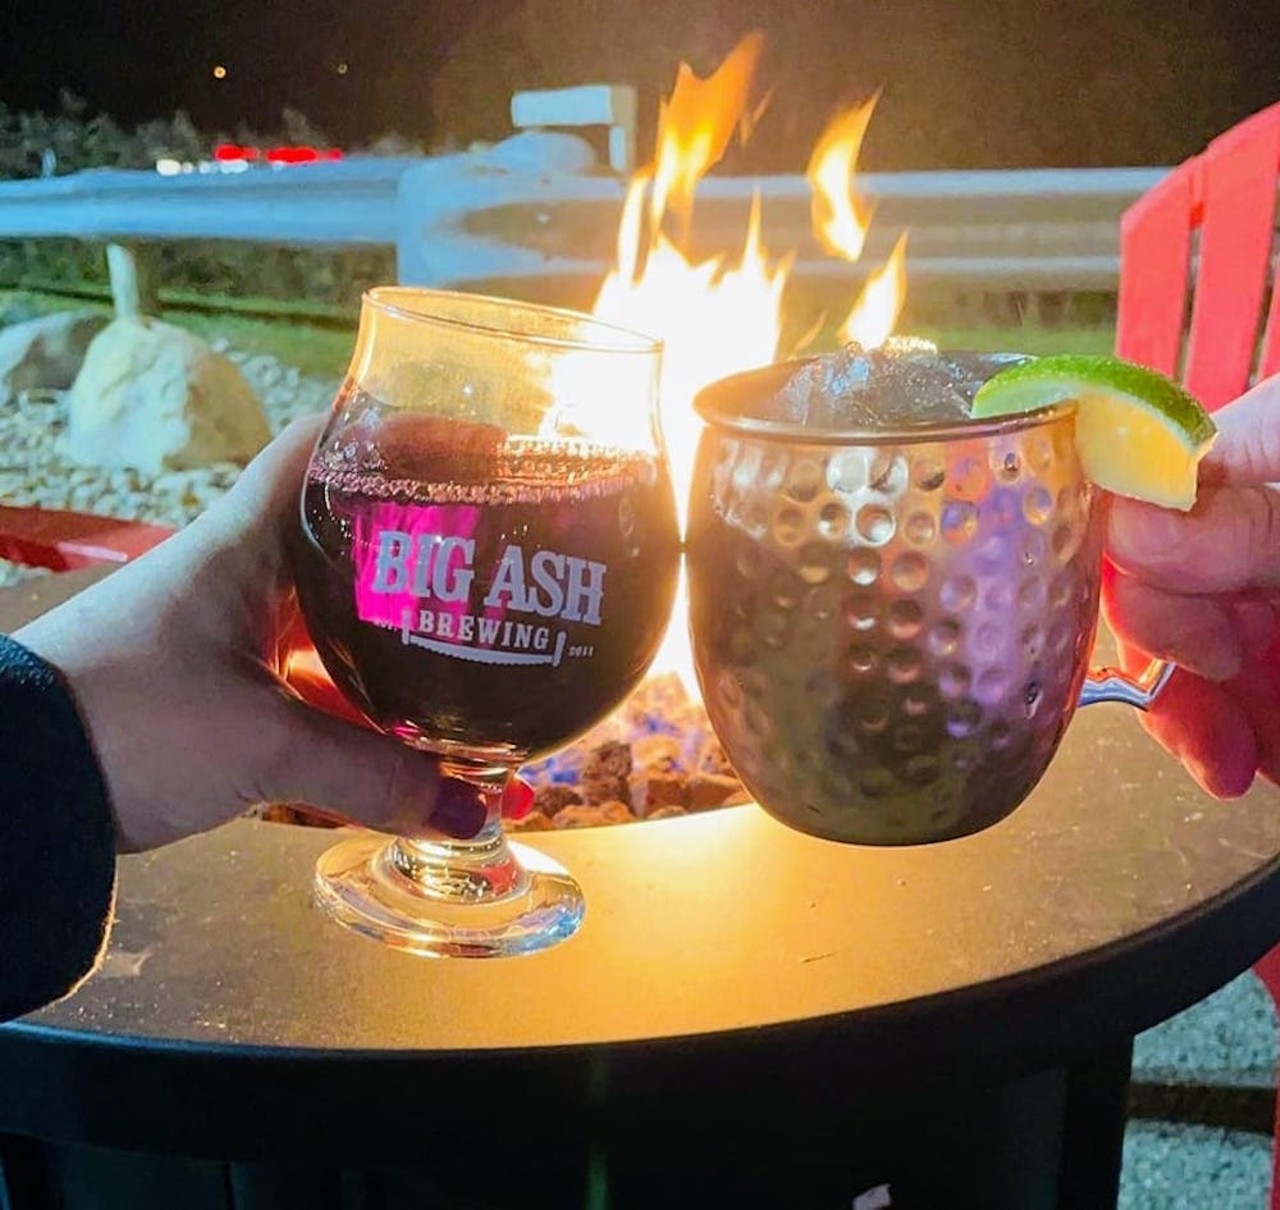 Big Ash Brewing
5230 Beechmont Ave., Anderson Township
At Big Ash Brewing, you can pick between 28 Pour Your Own Taps, including some award-winning craft beers, grab a warm, specialty pizza and gather around the firepit with your nearest and dearest.